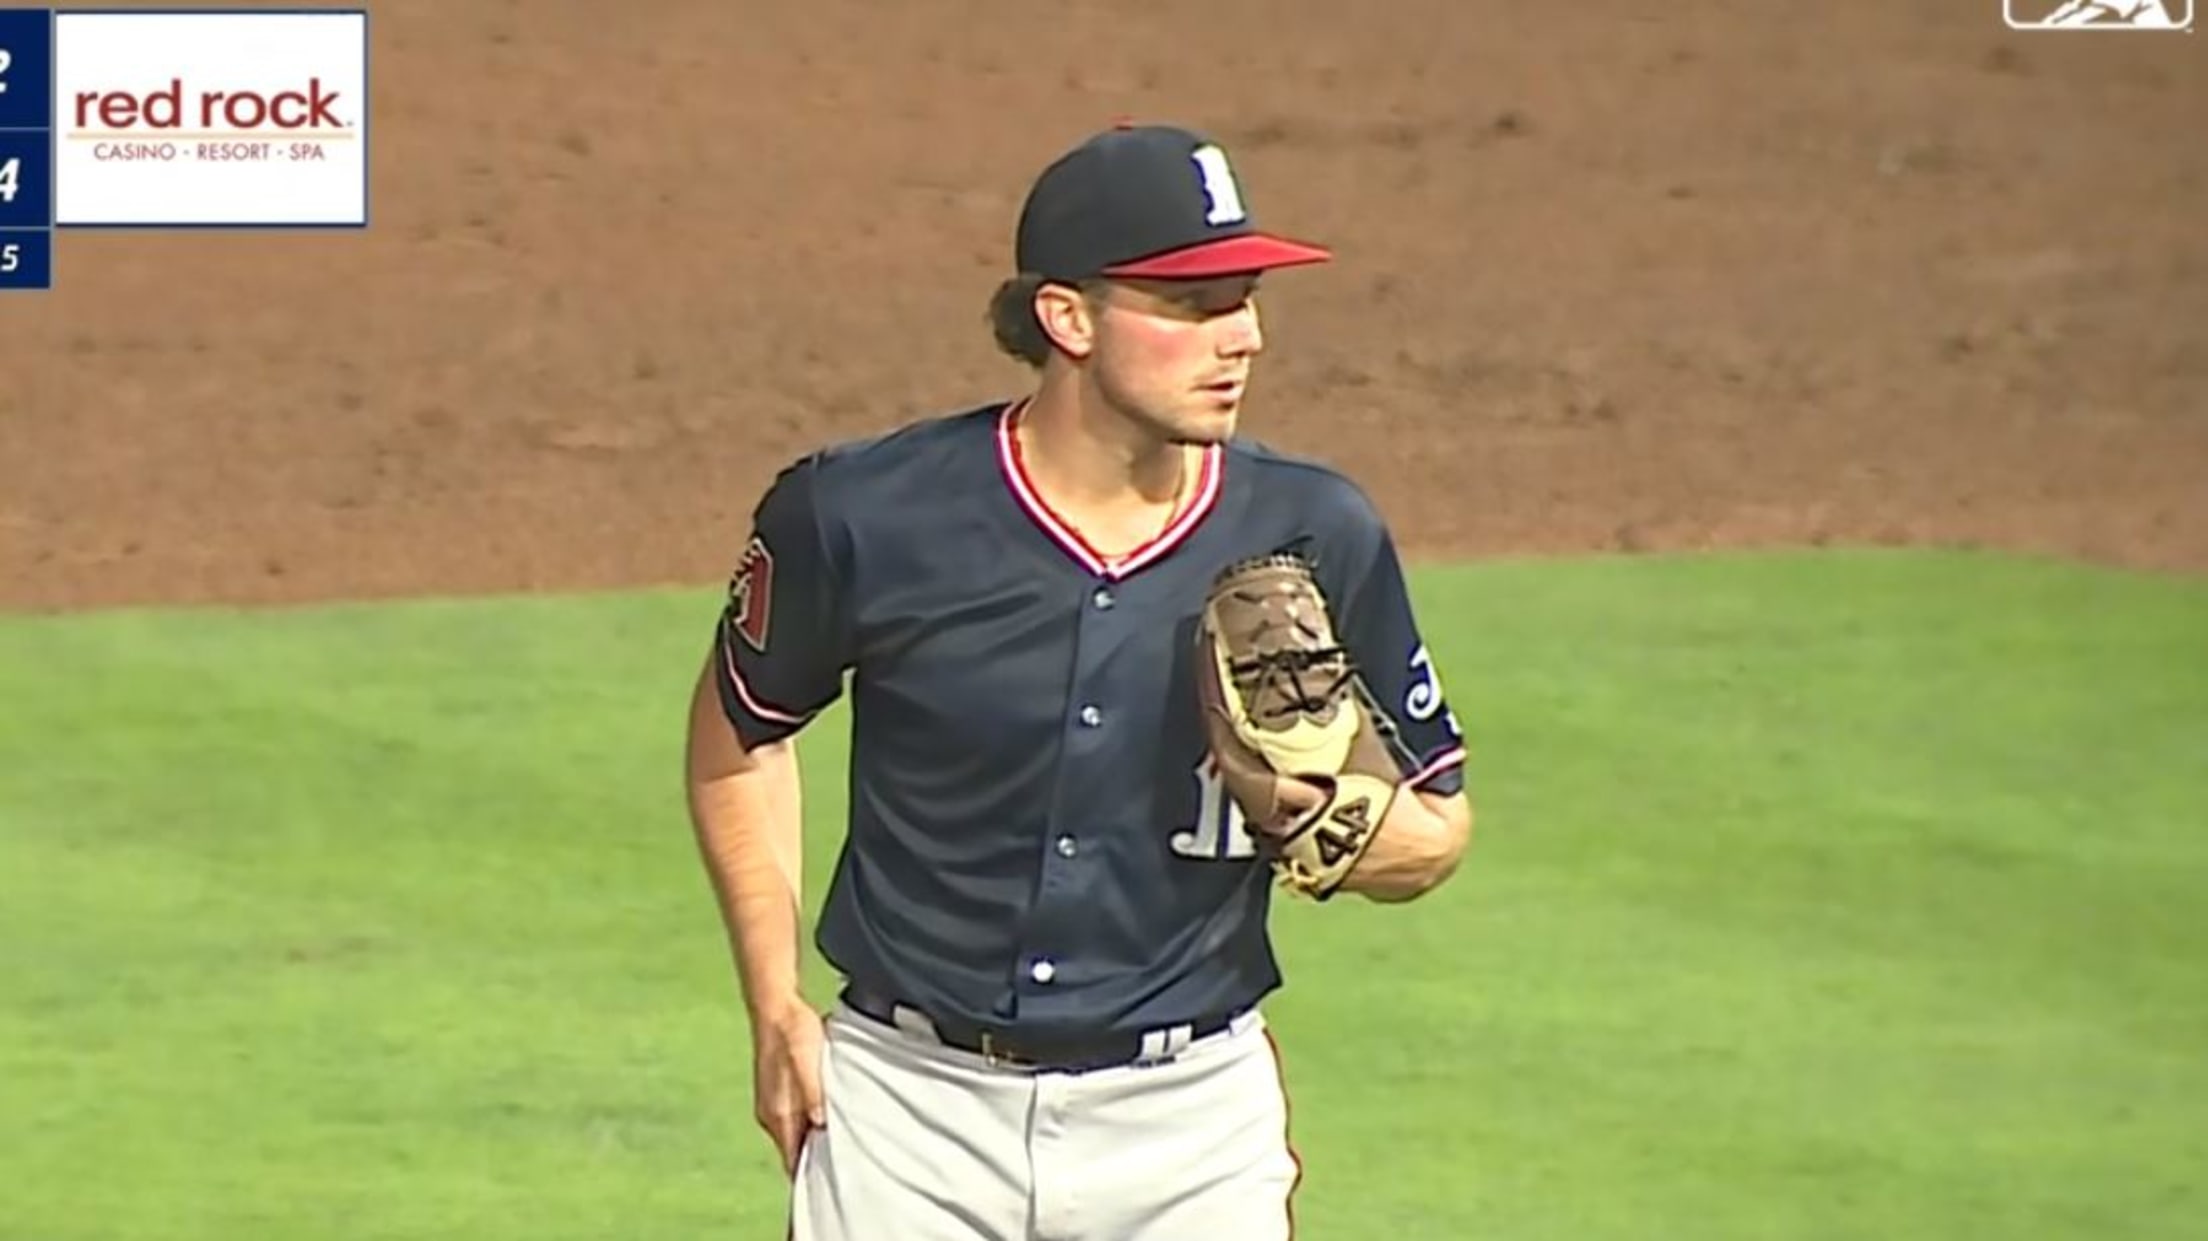 Pfaadt strong in Triple-A debut